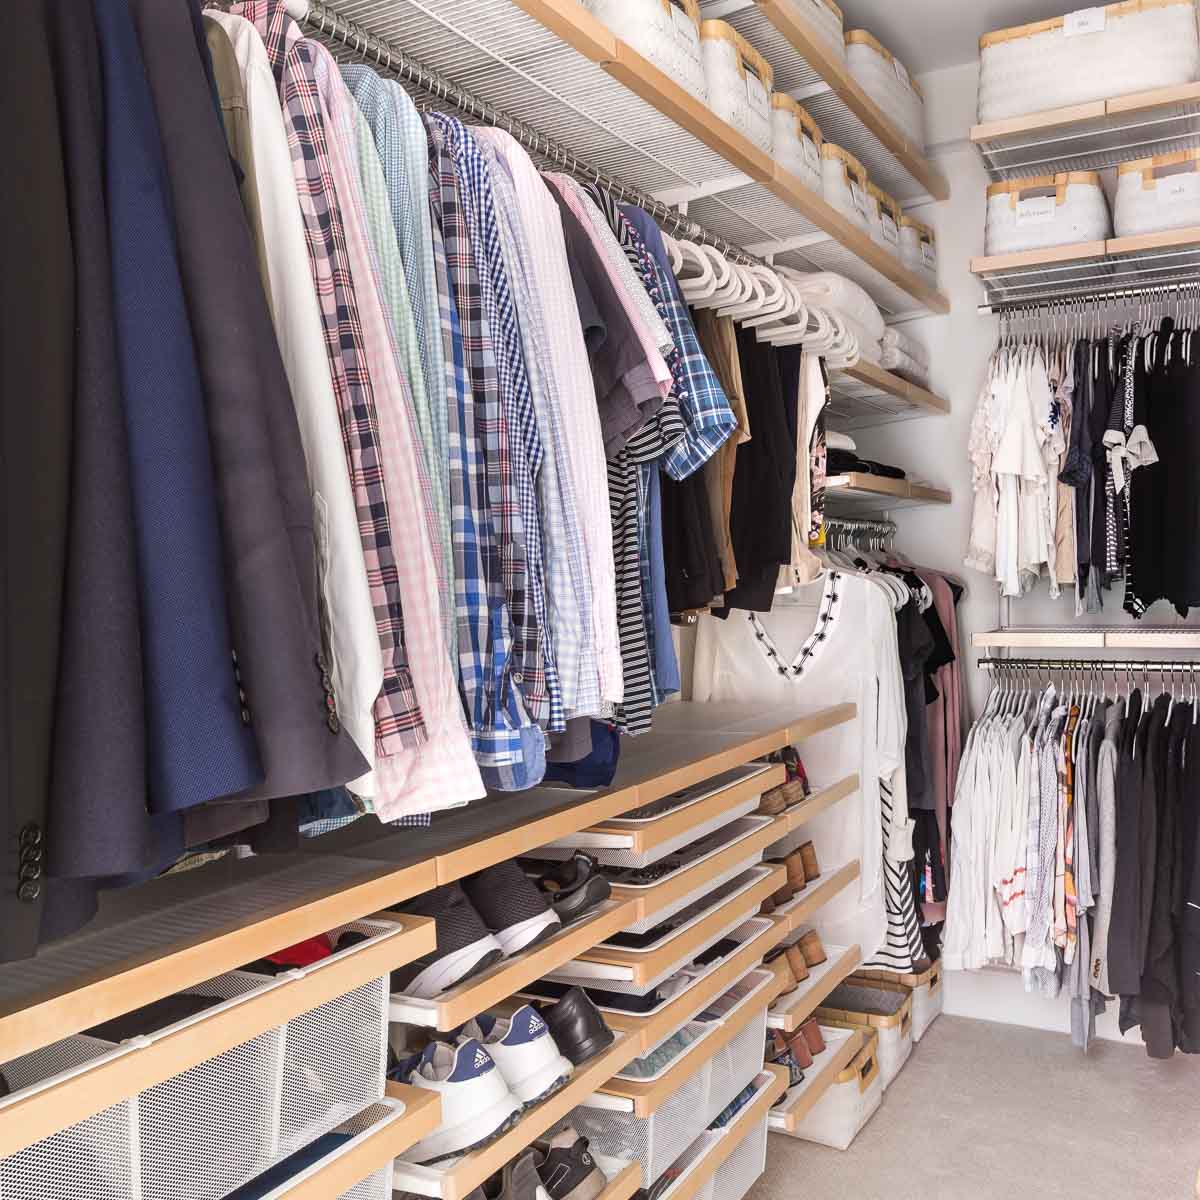 How to Maximize Your Closet Space, According to a Pro